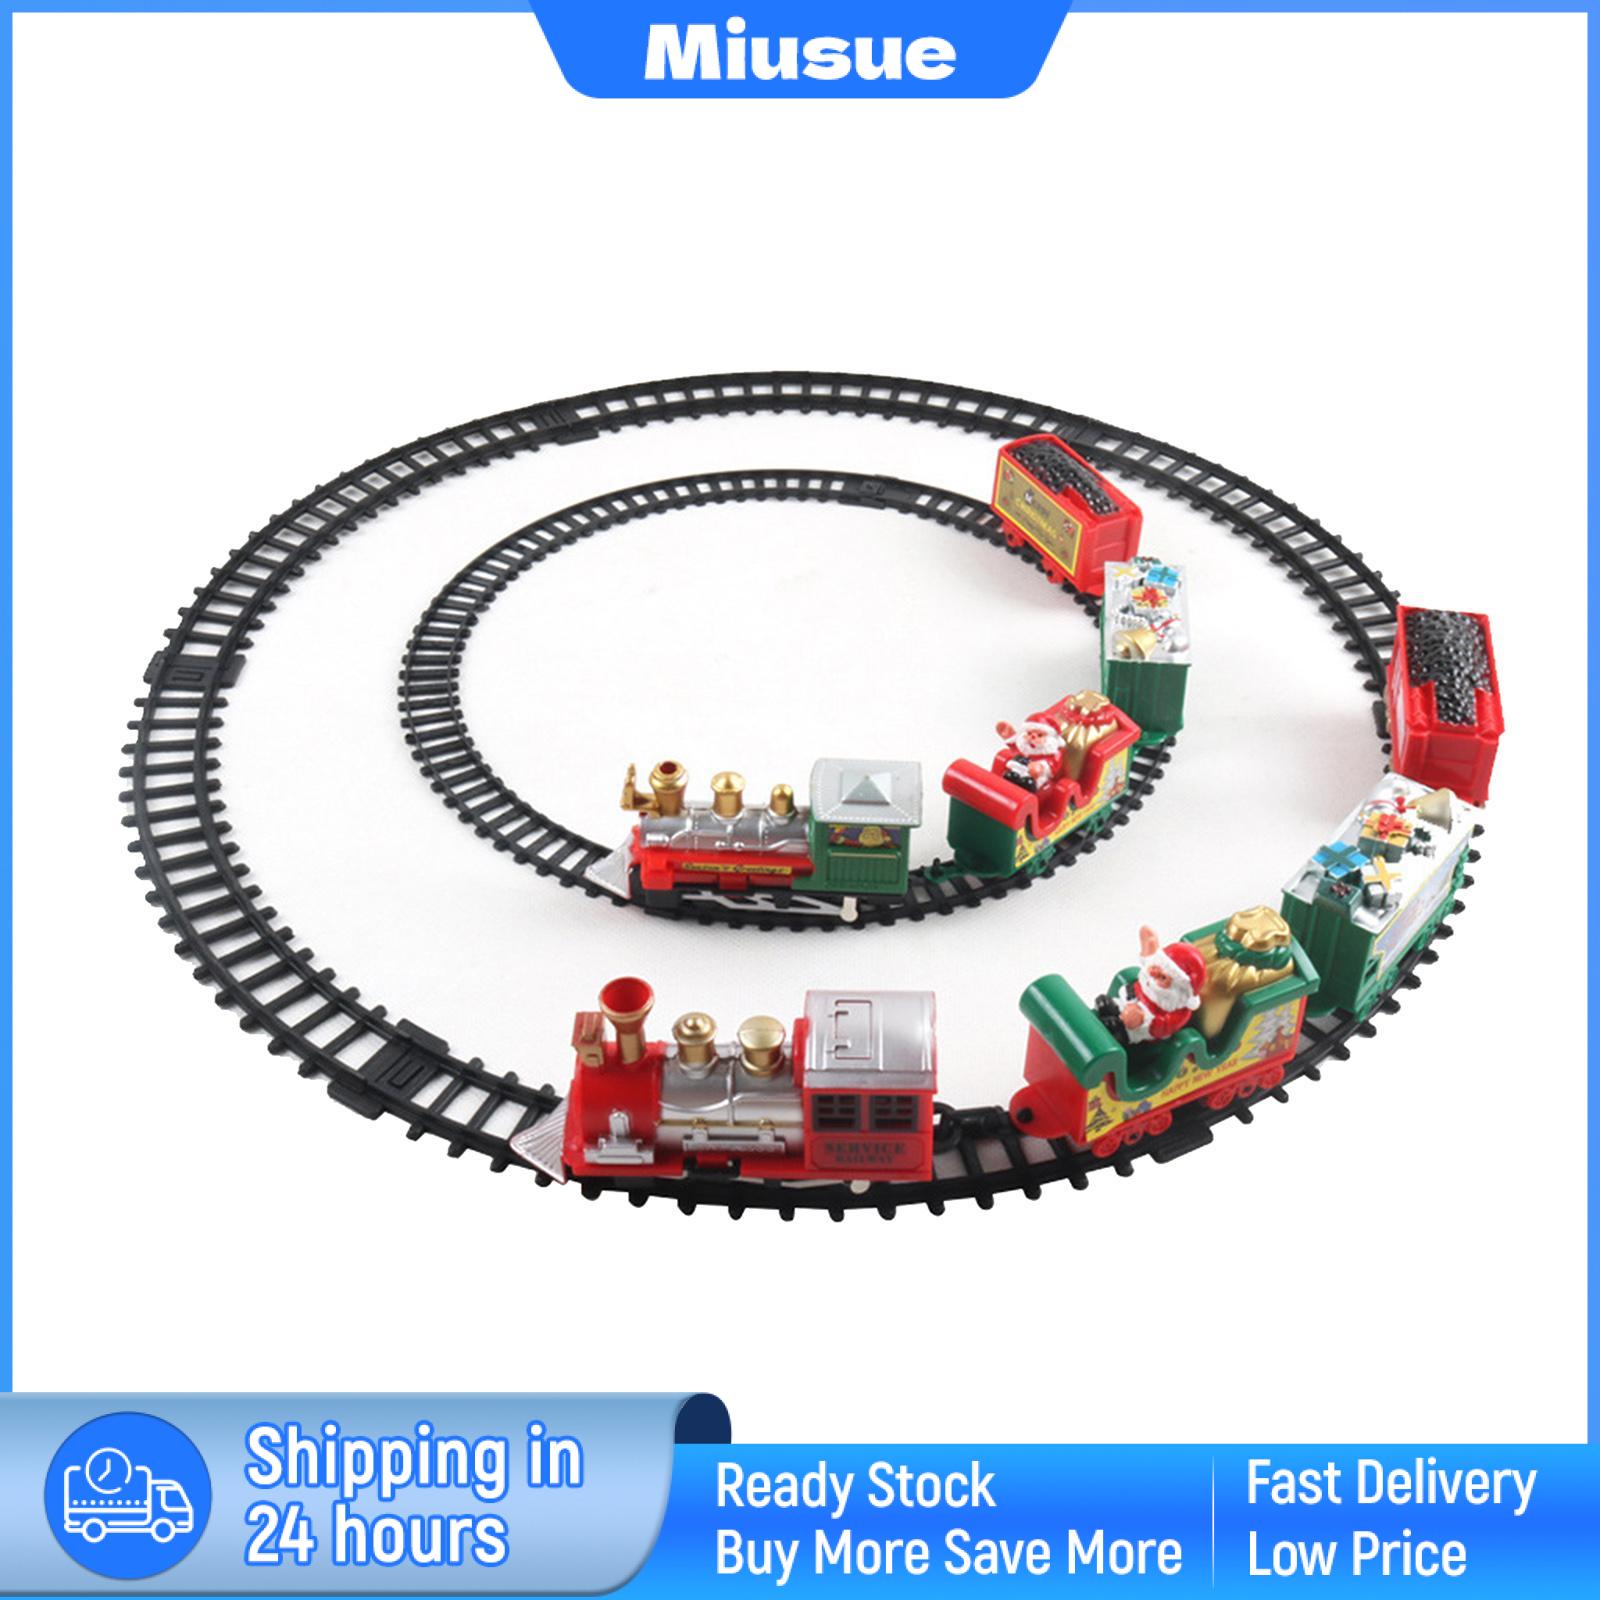 Miusue Christmas Train Set Toy with Track Mine Carriage Toys for Girls